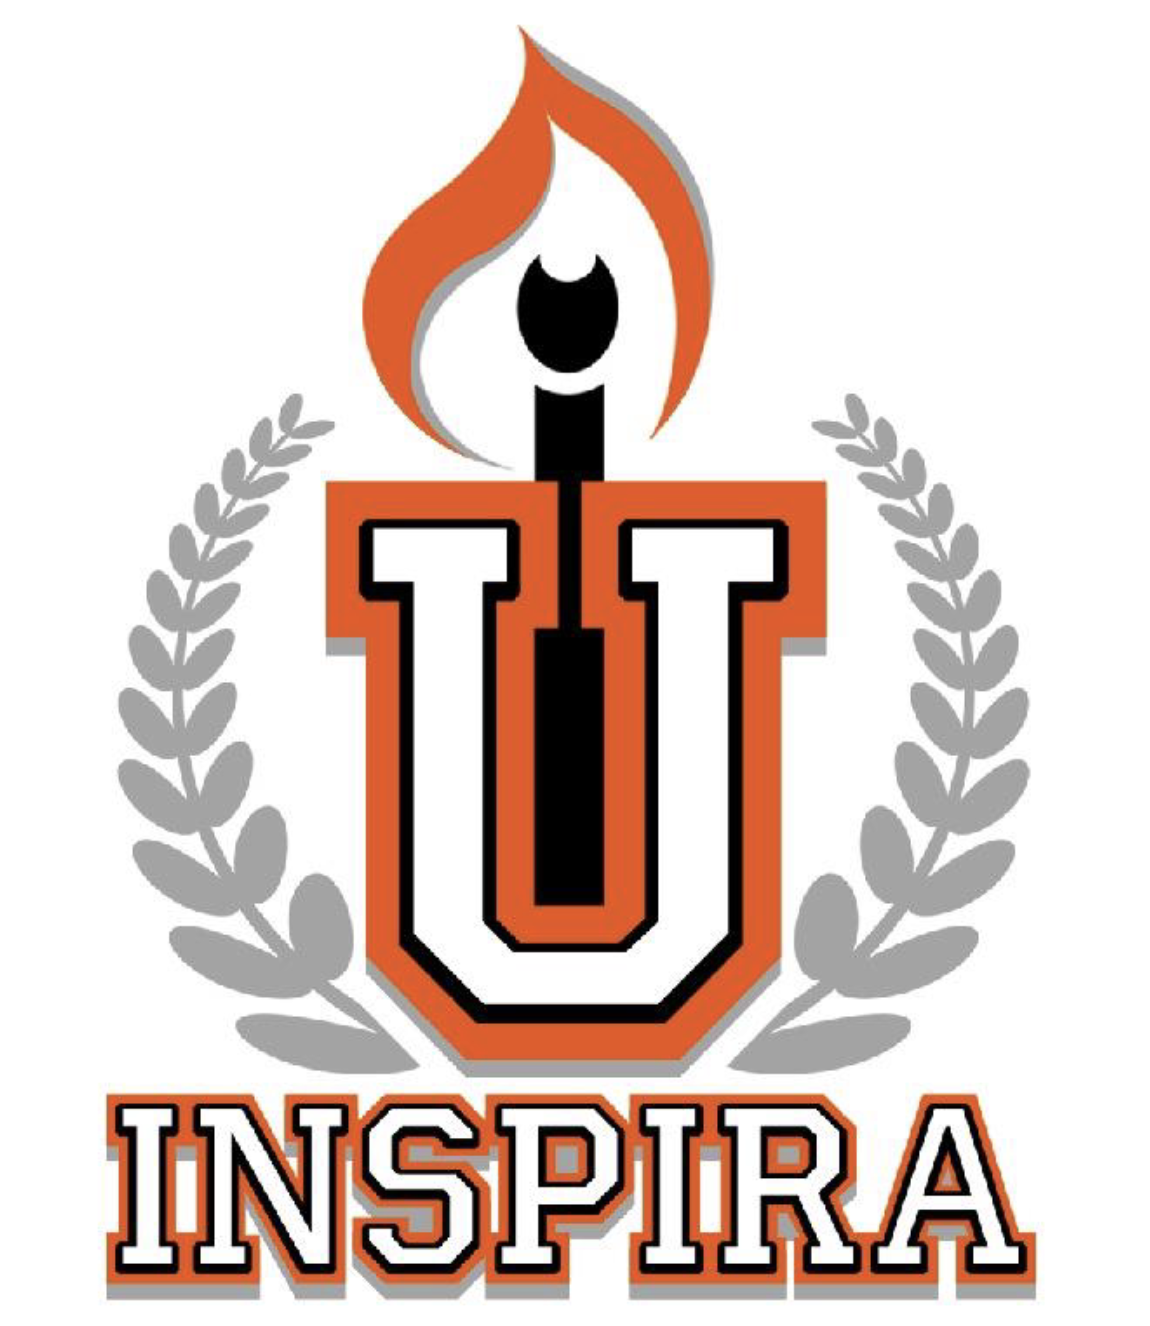 Text on the bottom says "Inspira," and the central focus is a large "U" in a college font. The flame and match are coming out of the U's negative space